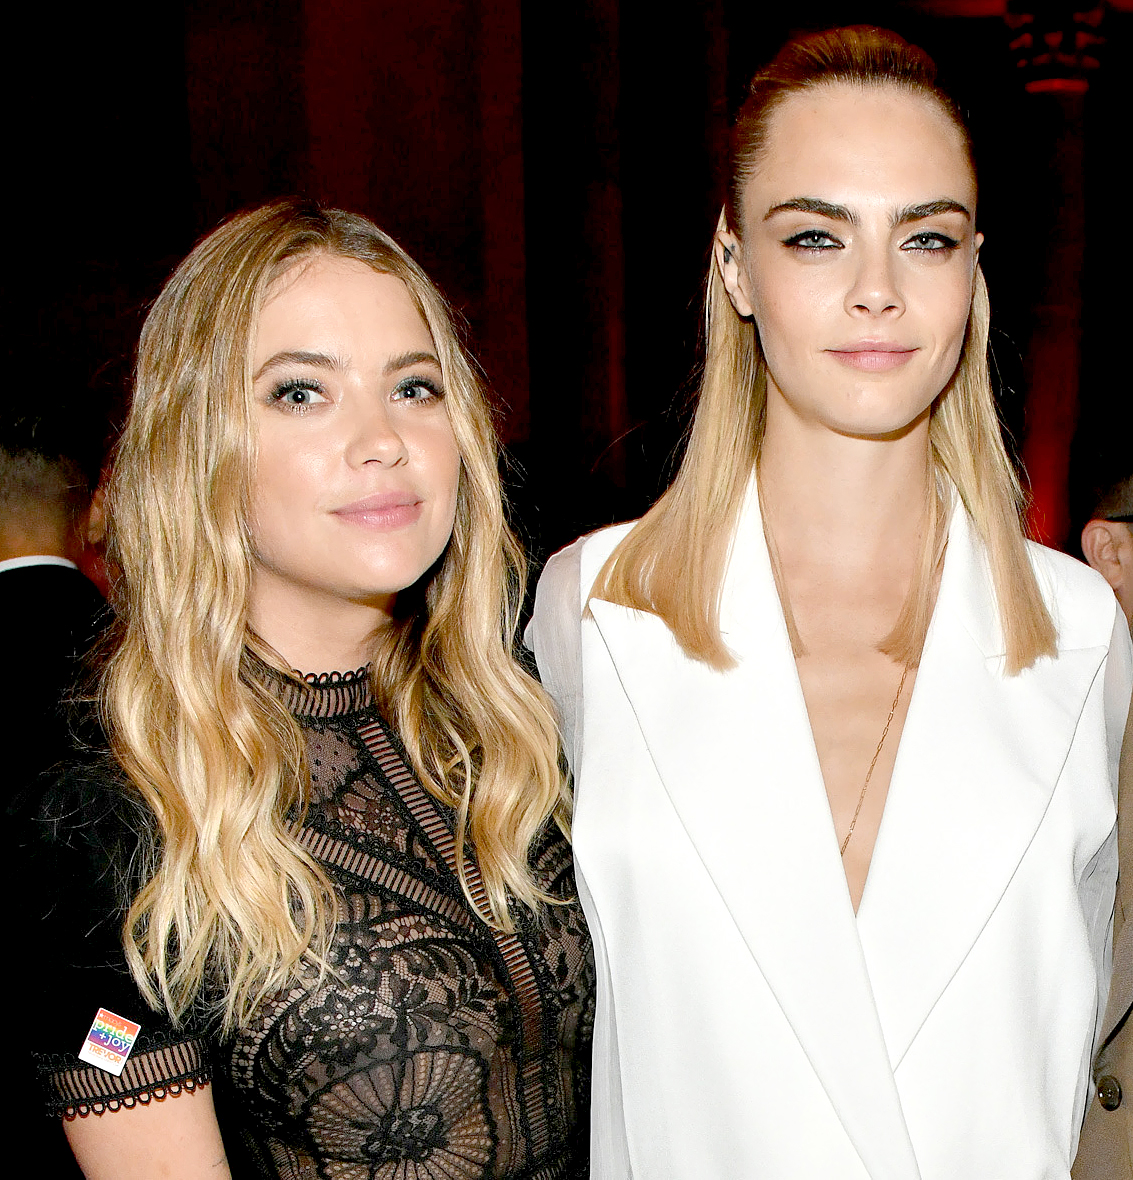 Fans Think Cara Delevingne and Ashley Benson Are Engaged